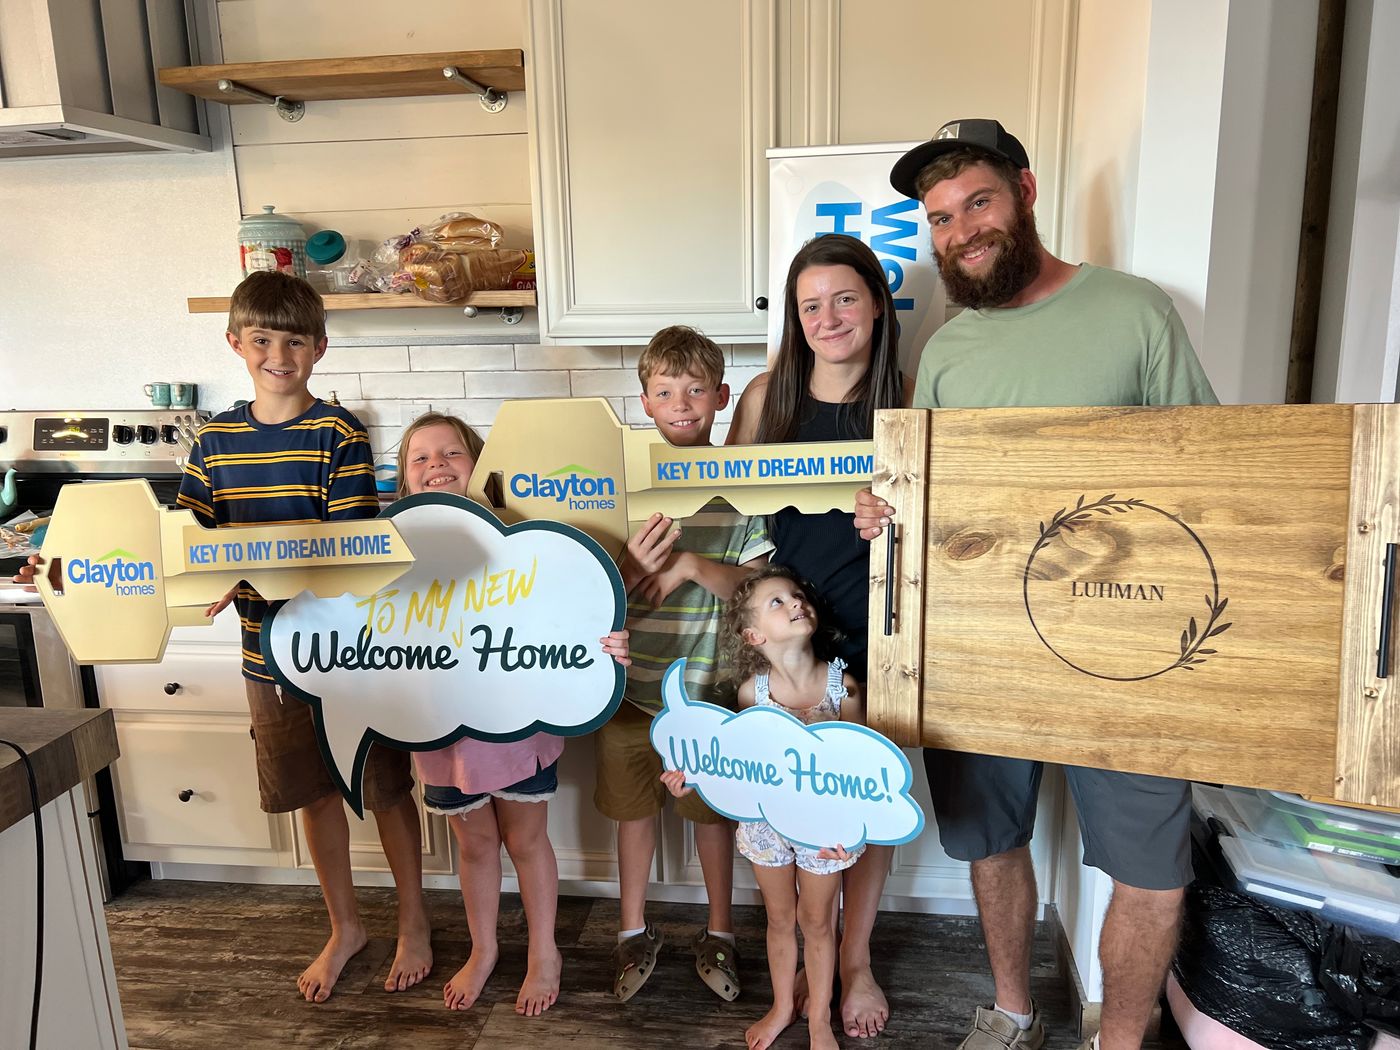 CHARLES L. welcome home image